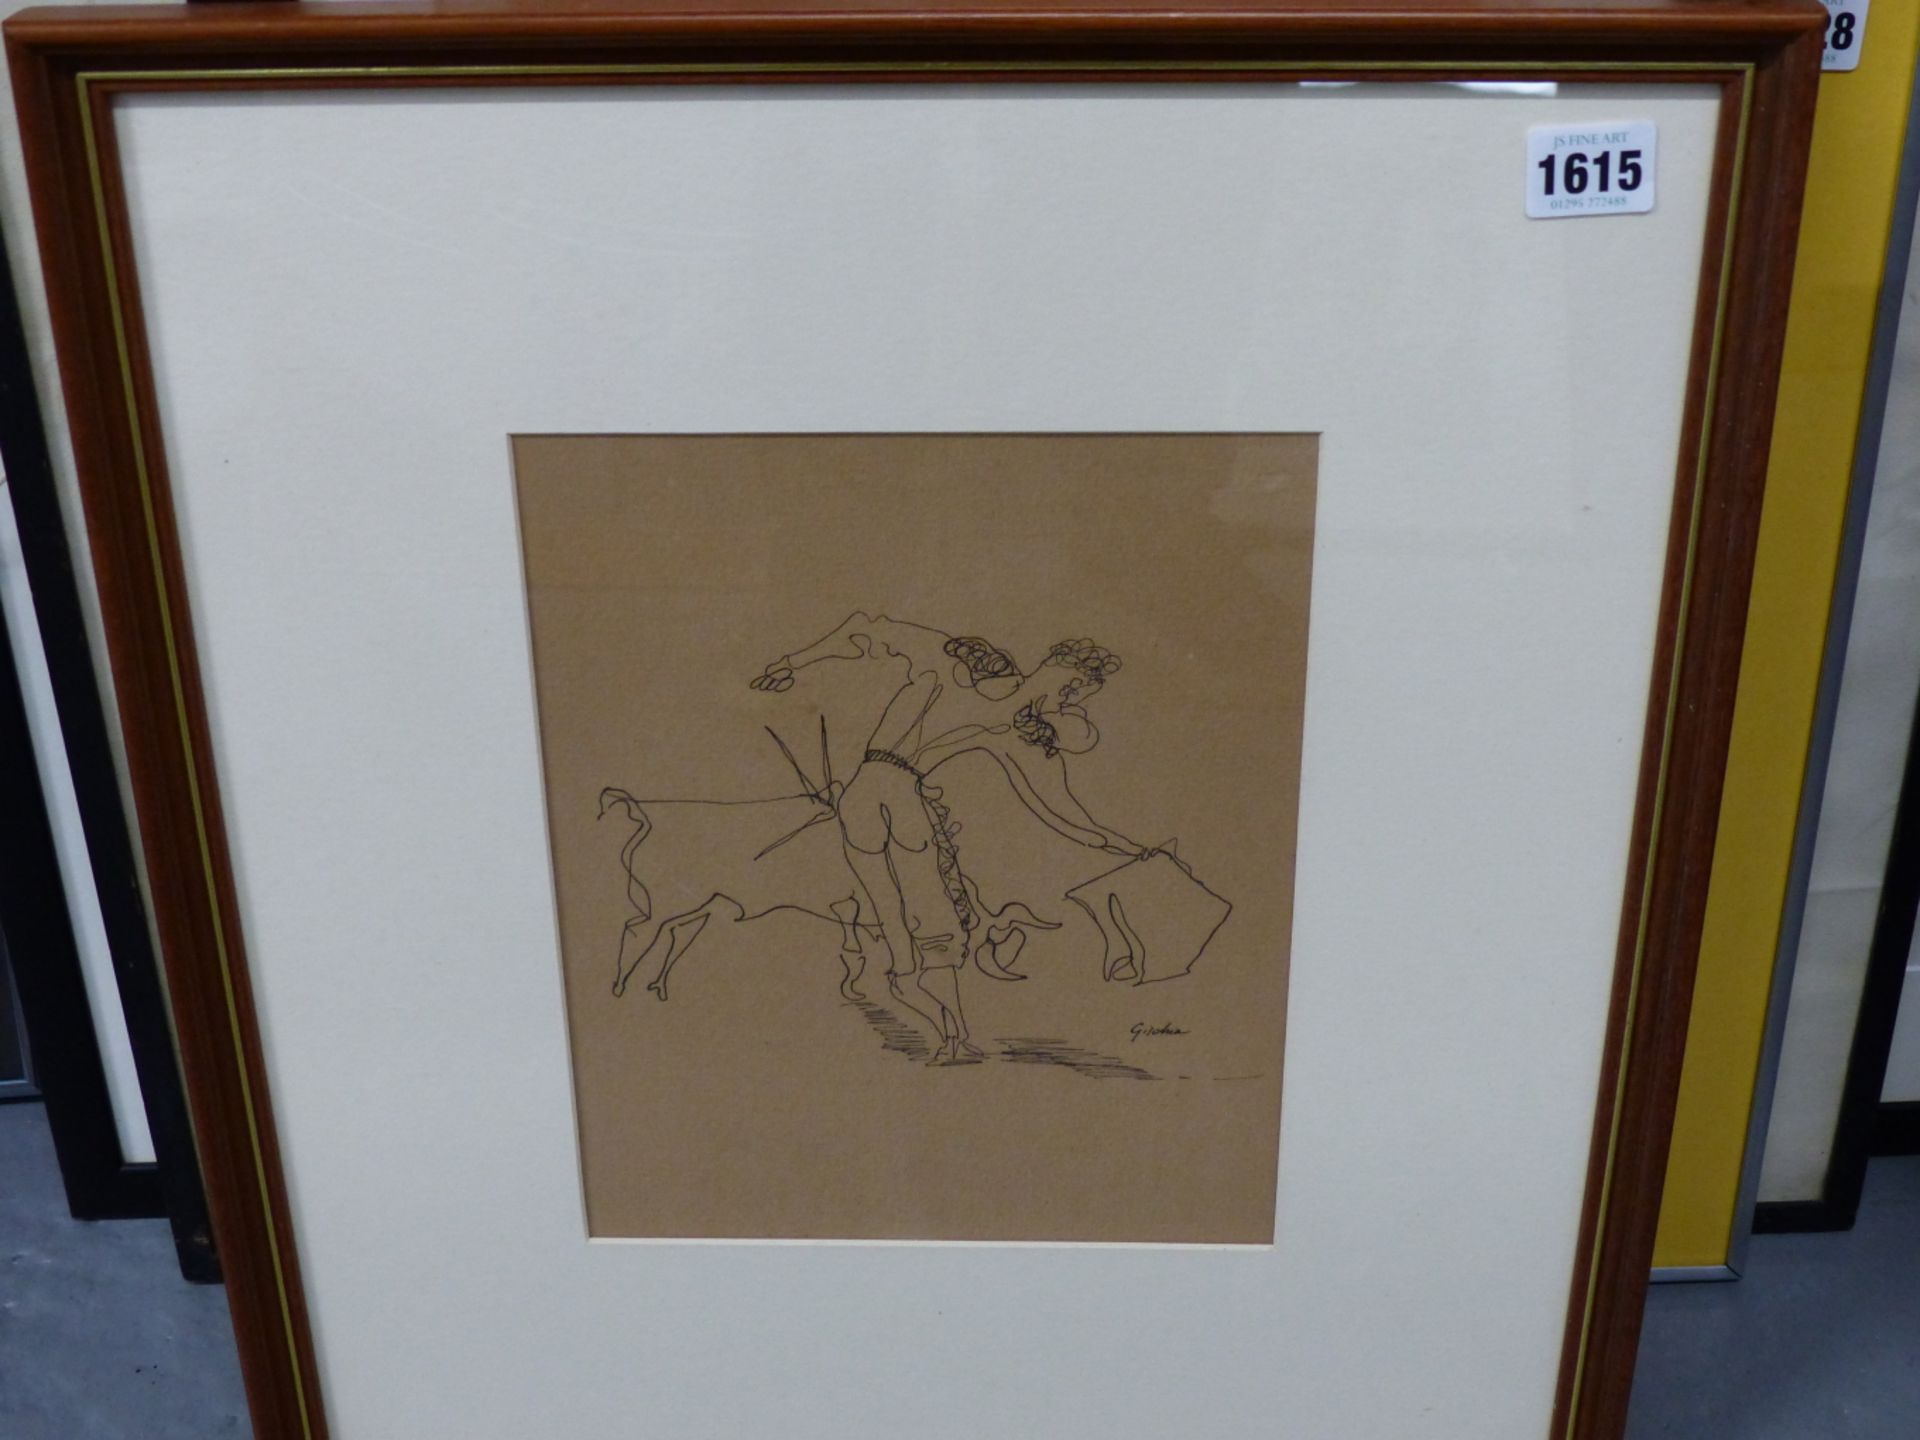 LEON GISCHIA, FRENCH 1903-1991, ABSTRACT PORTRAYAL OF THE BULL FIGHTER AND BULL. PEN AND INK - Image 3 of 4